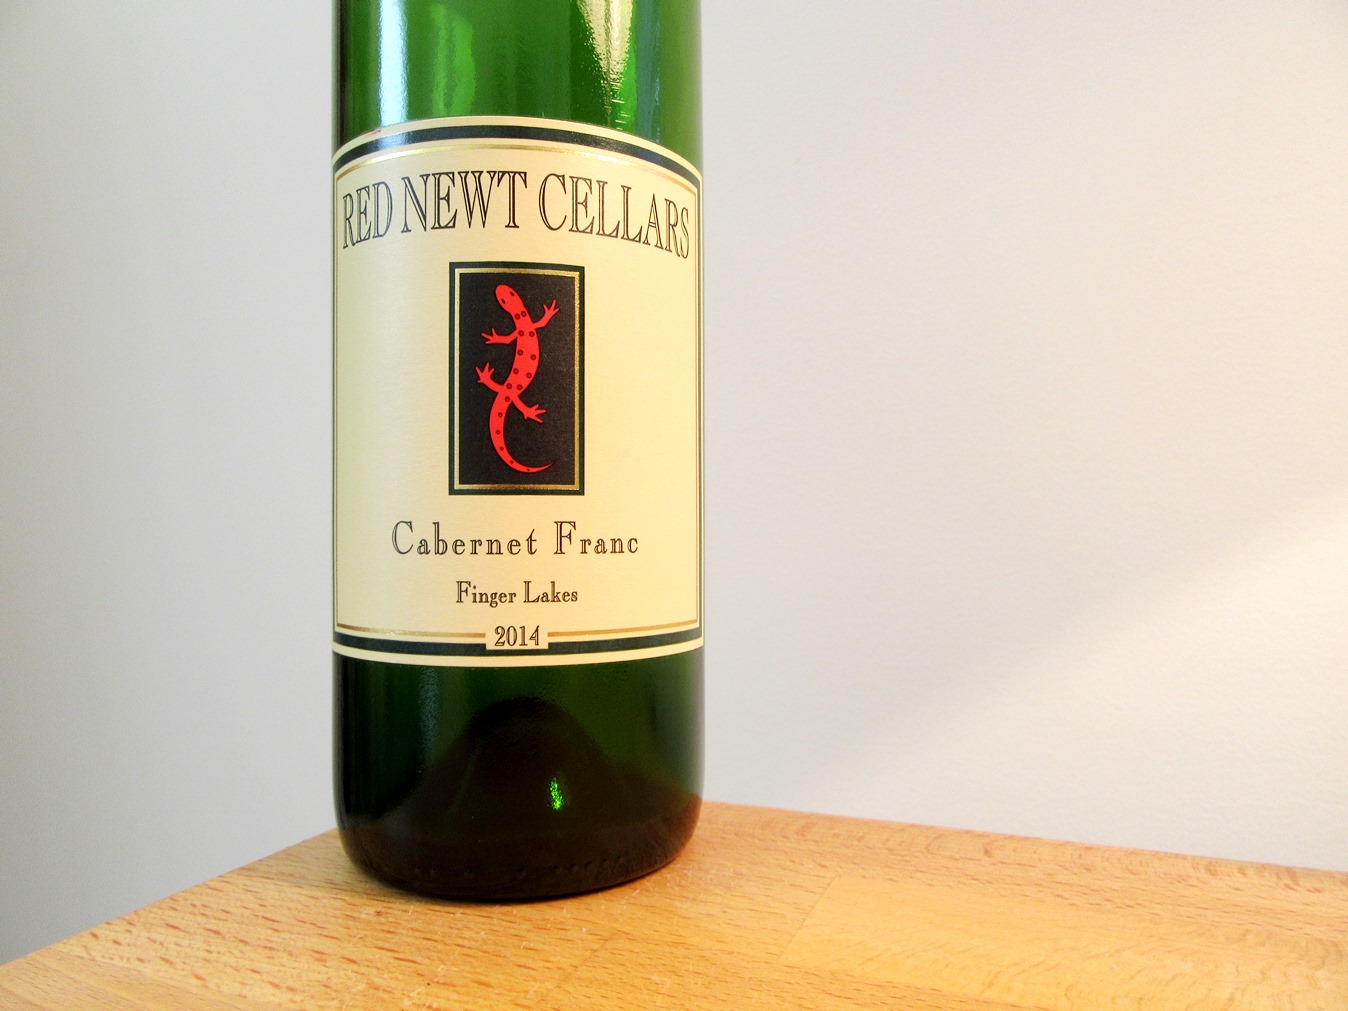 Red Newt Cellars, Cabernet Franc 2014, Finger Lakes, New York, Wine Casual